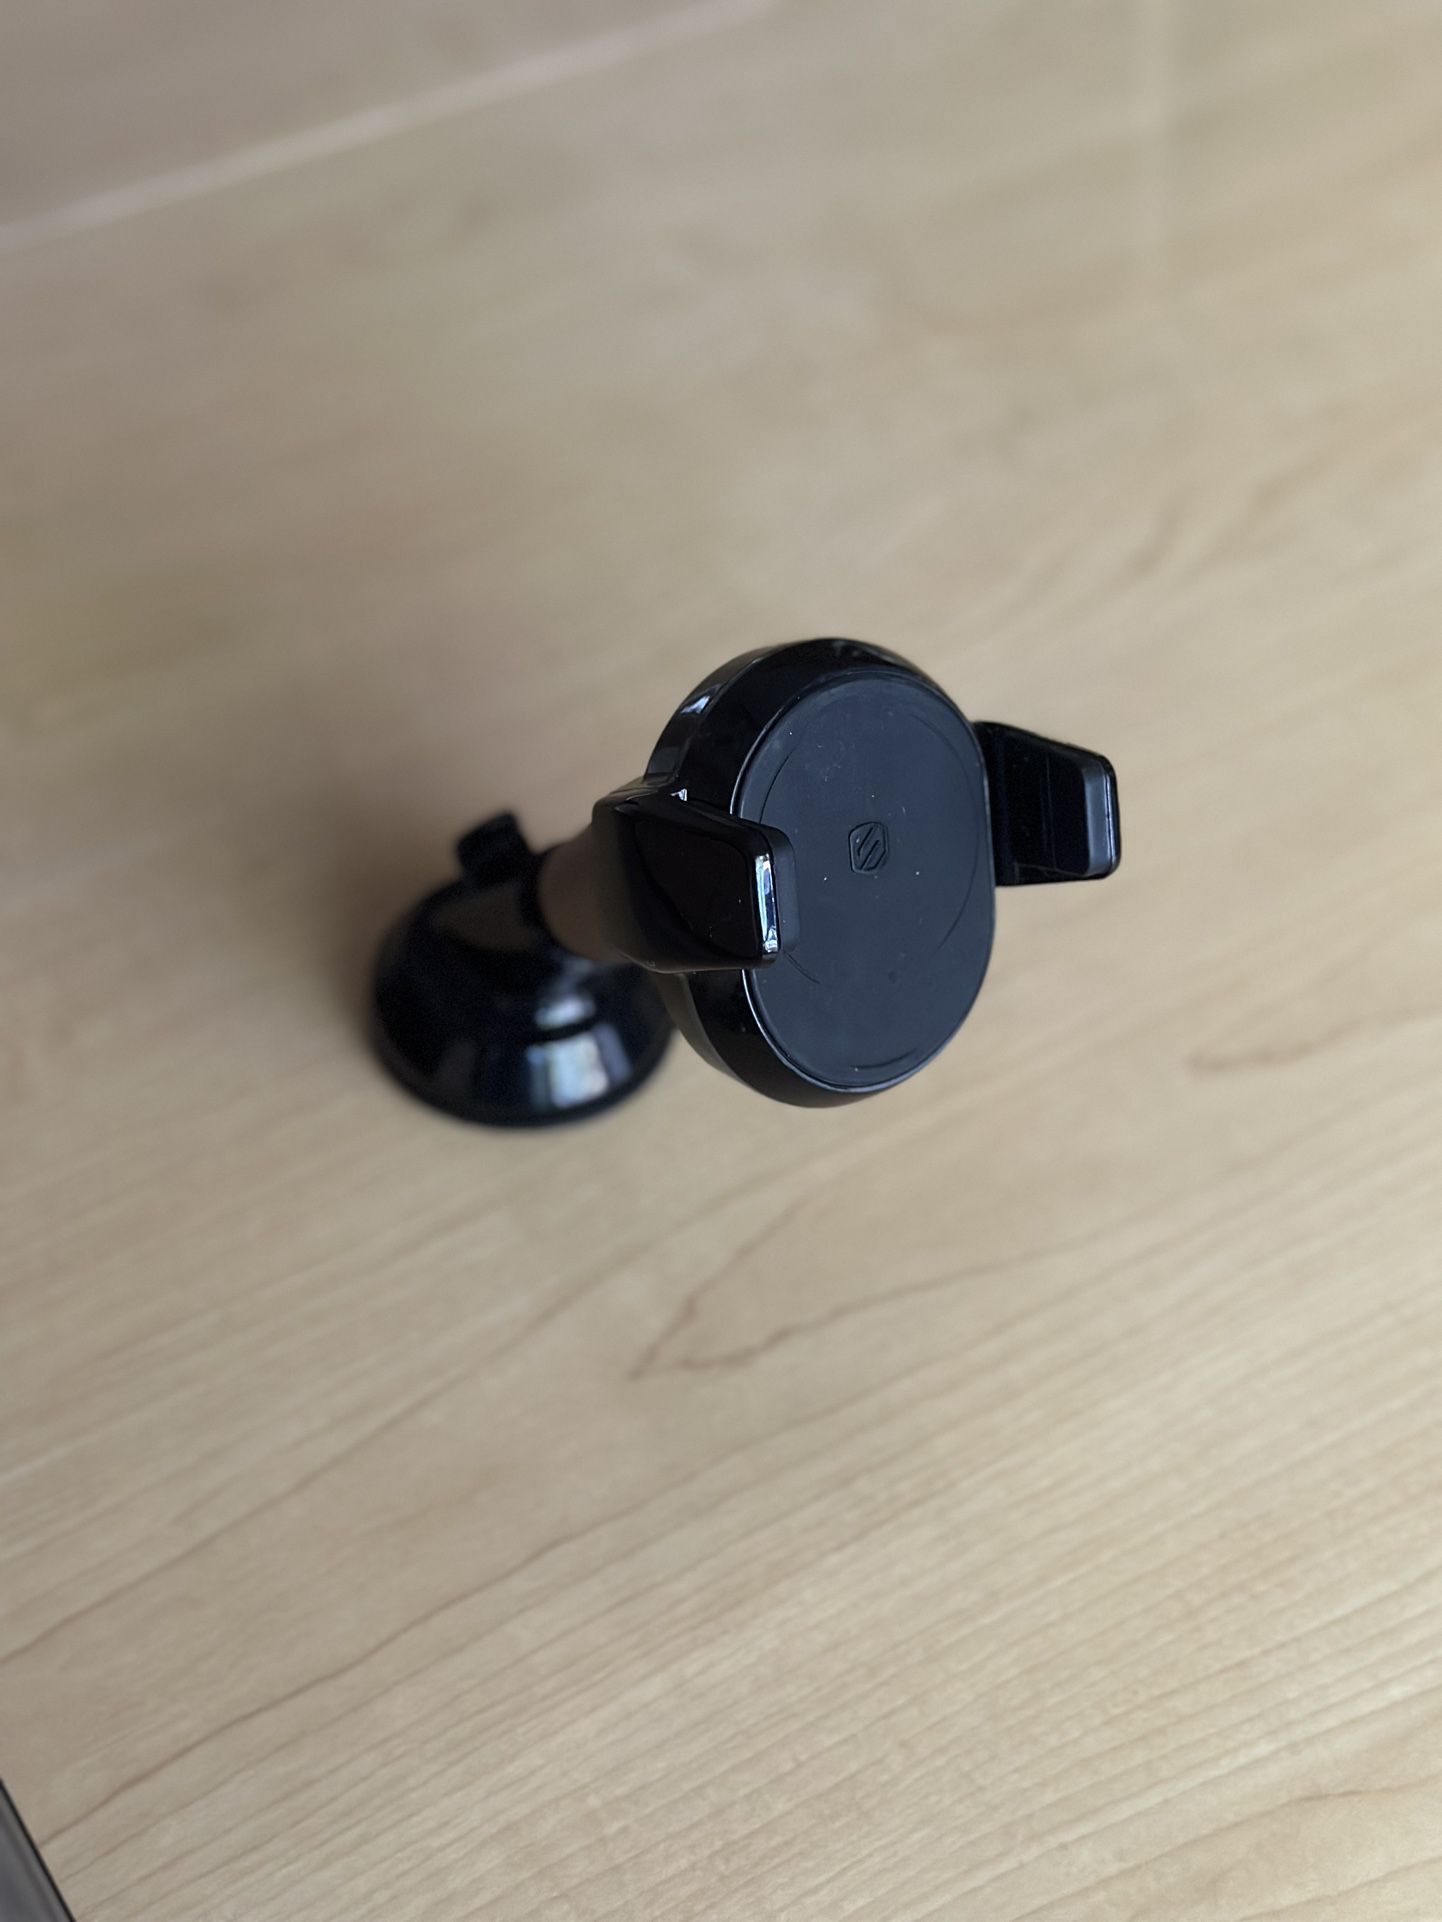 Phone Suction Cup Mount